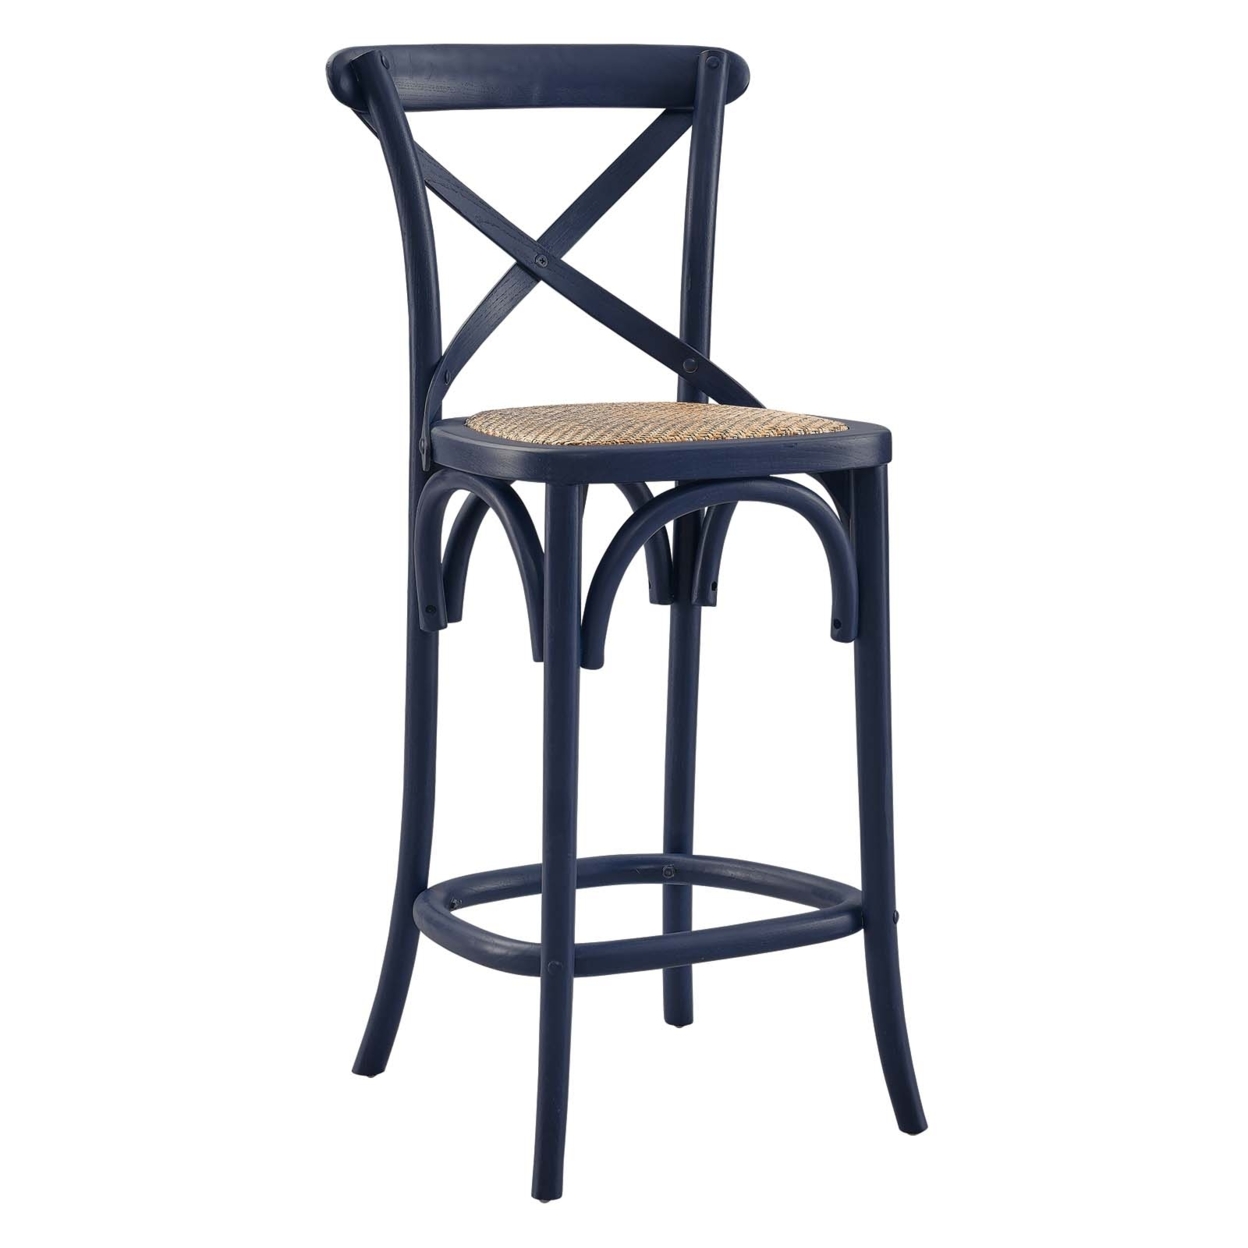 Wooden Farmhouse Counter Stool With X Brace Back And Woven Seat, Blue, Saltoro Sherpi